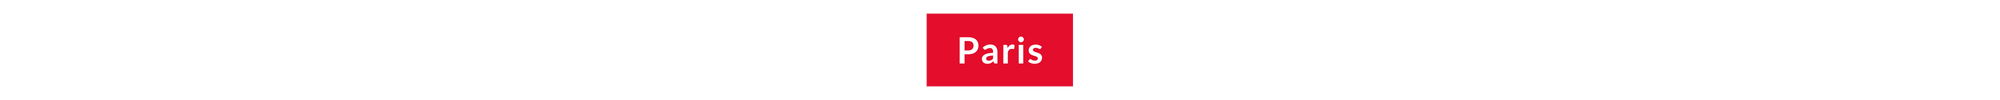 The word Paris in a red block